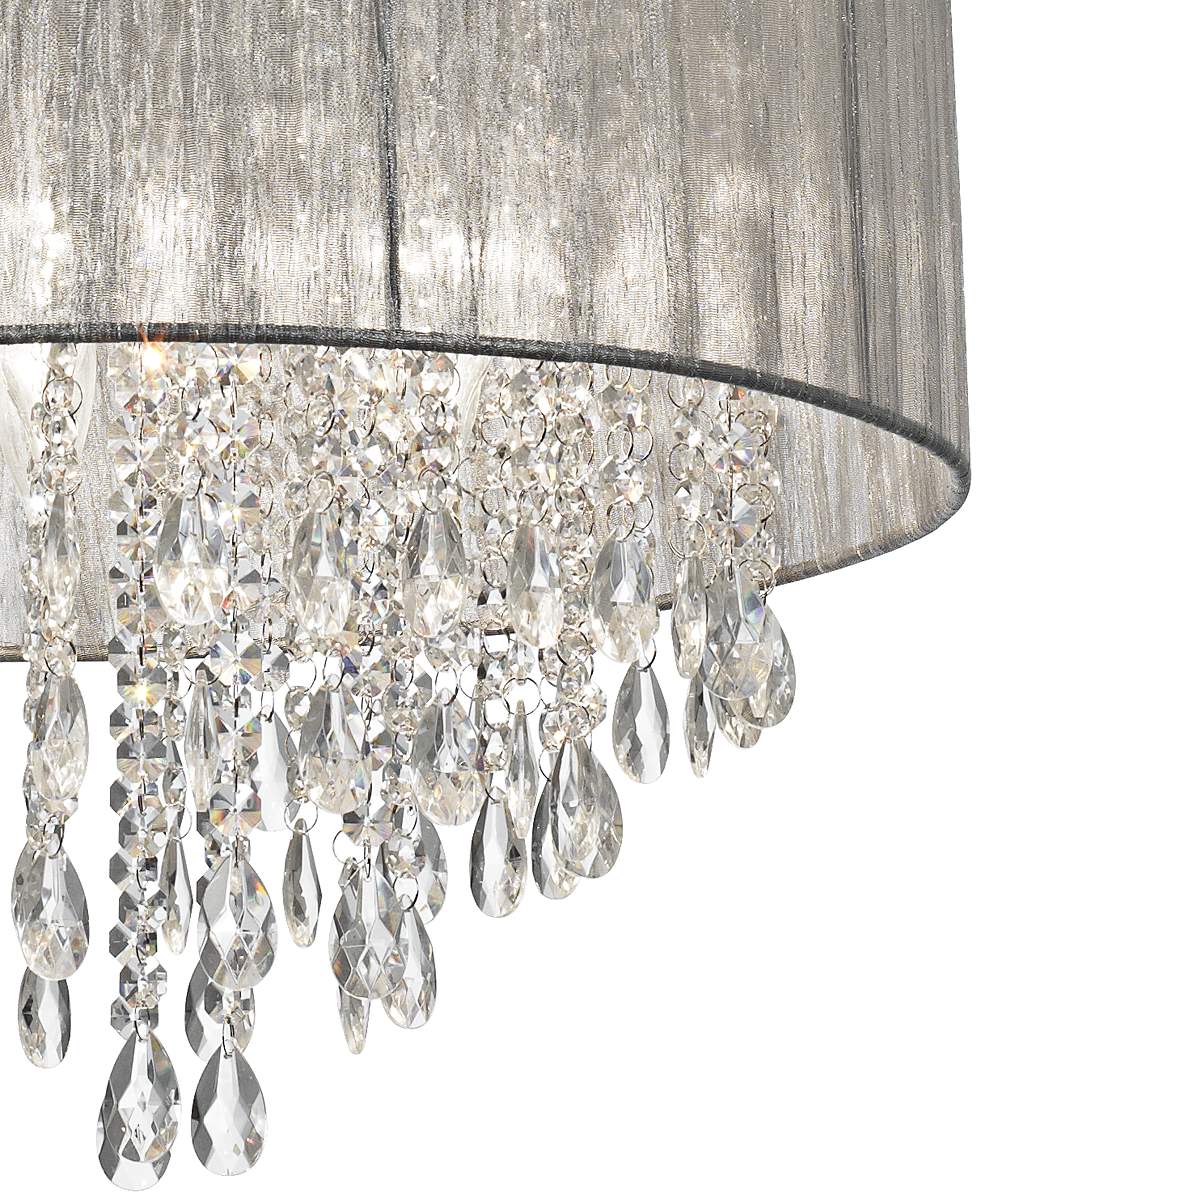 How To Clean A Crystal Chandelier, What Can I Use To Clean My Chandelier